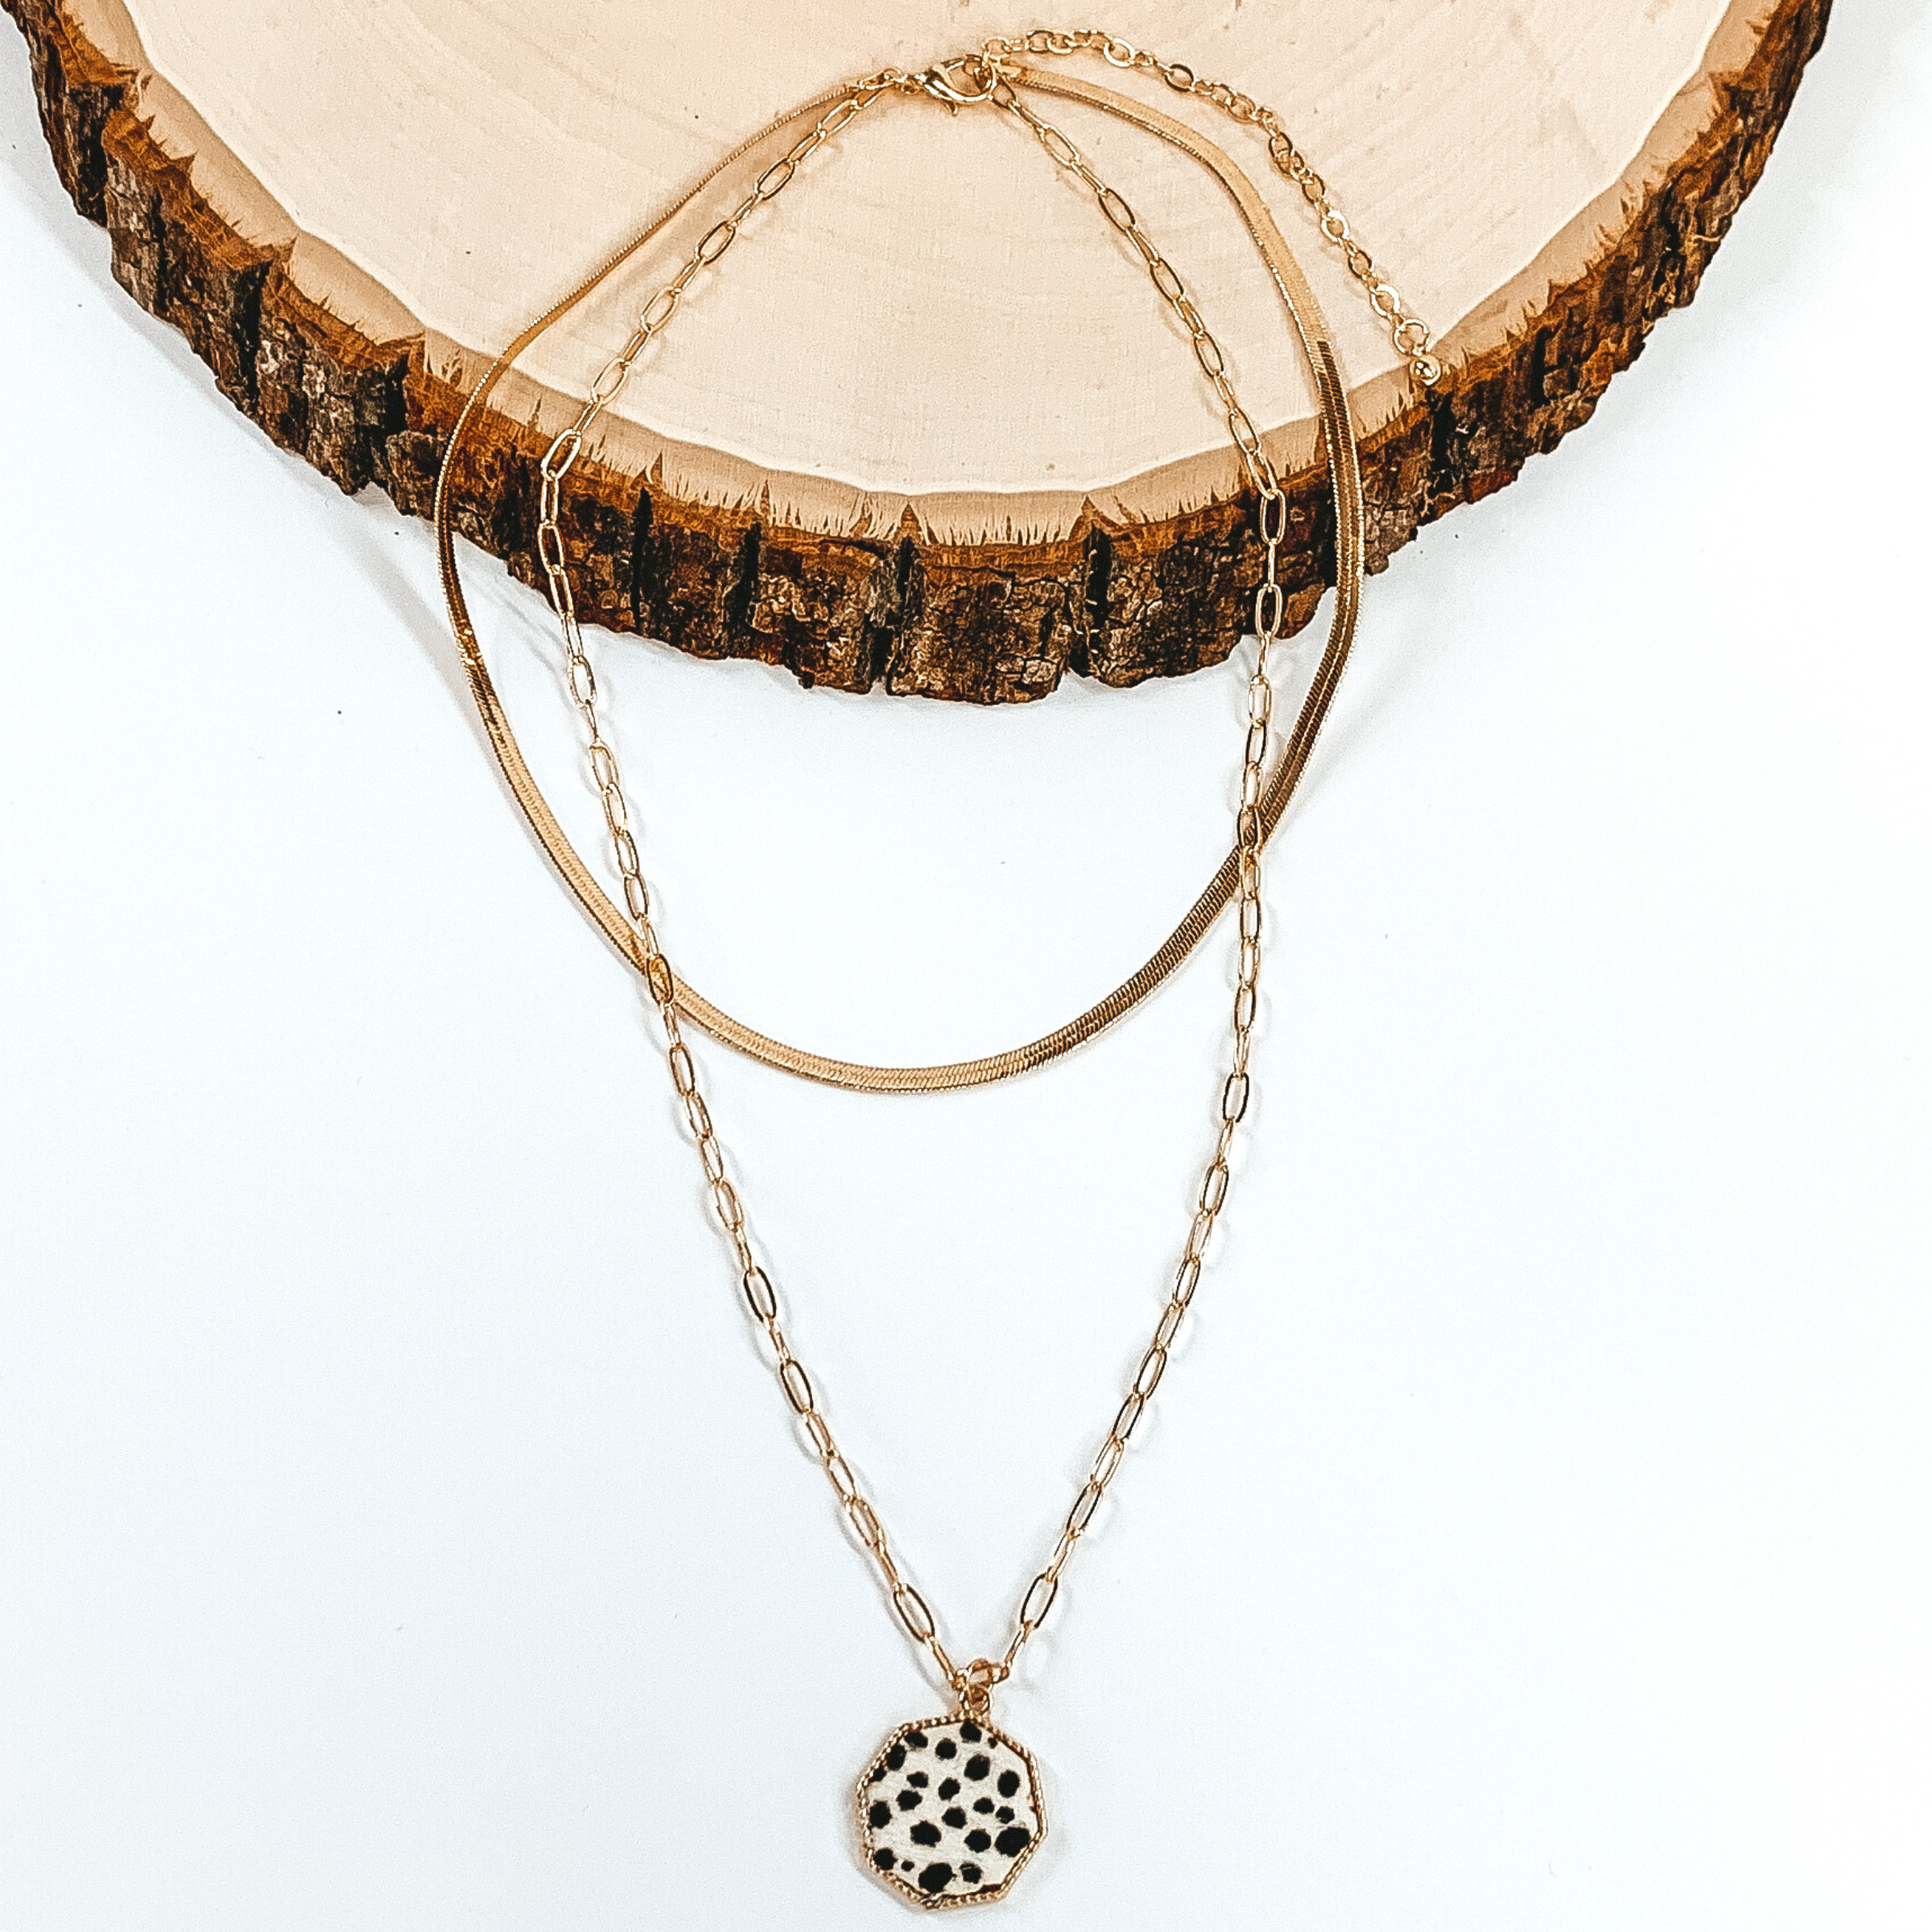 Gold paperclip doubled chain with an octogan pendant. The pendant has a white hide inlay with a dotted print. This necklace is pictured laying on a piece of wood on a white background.